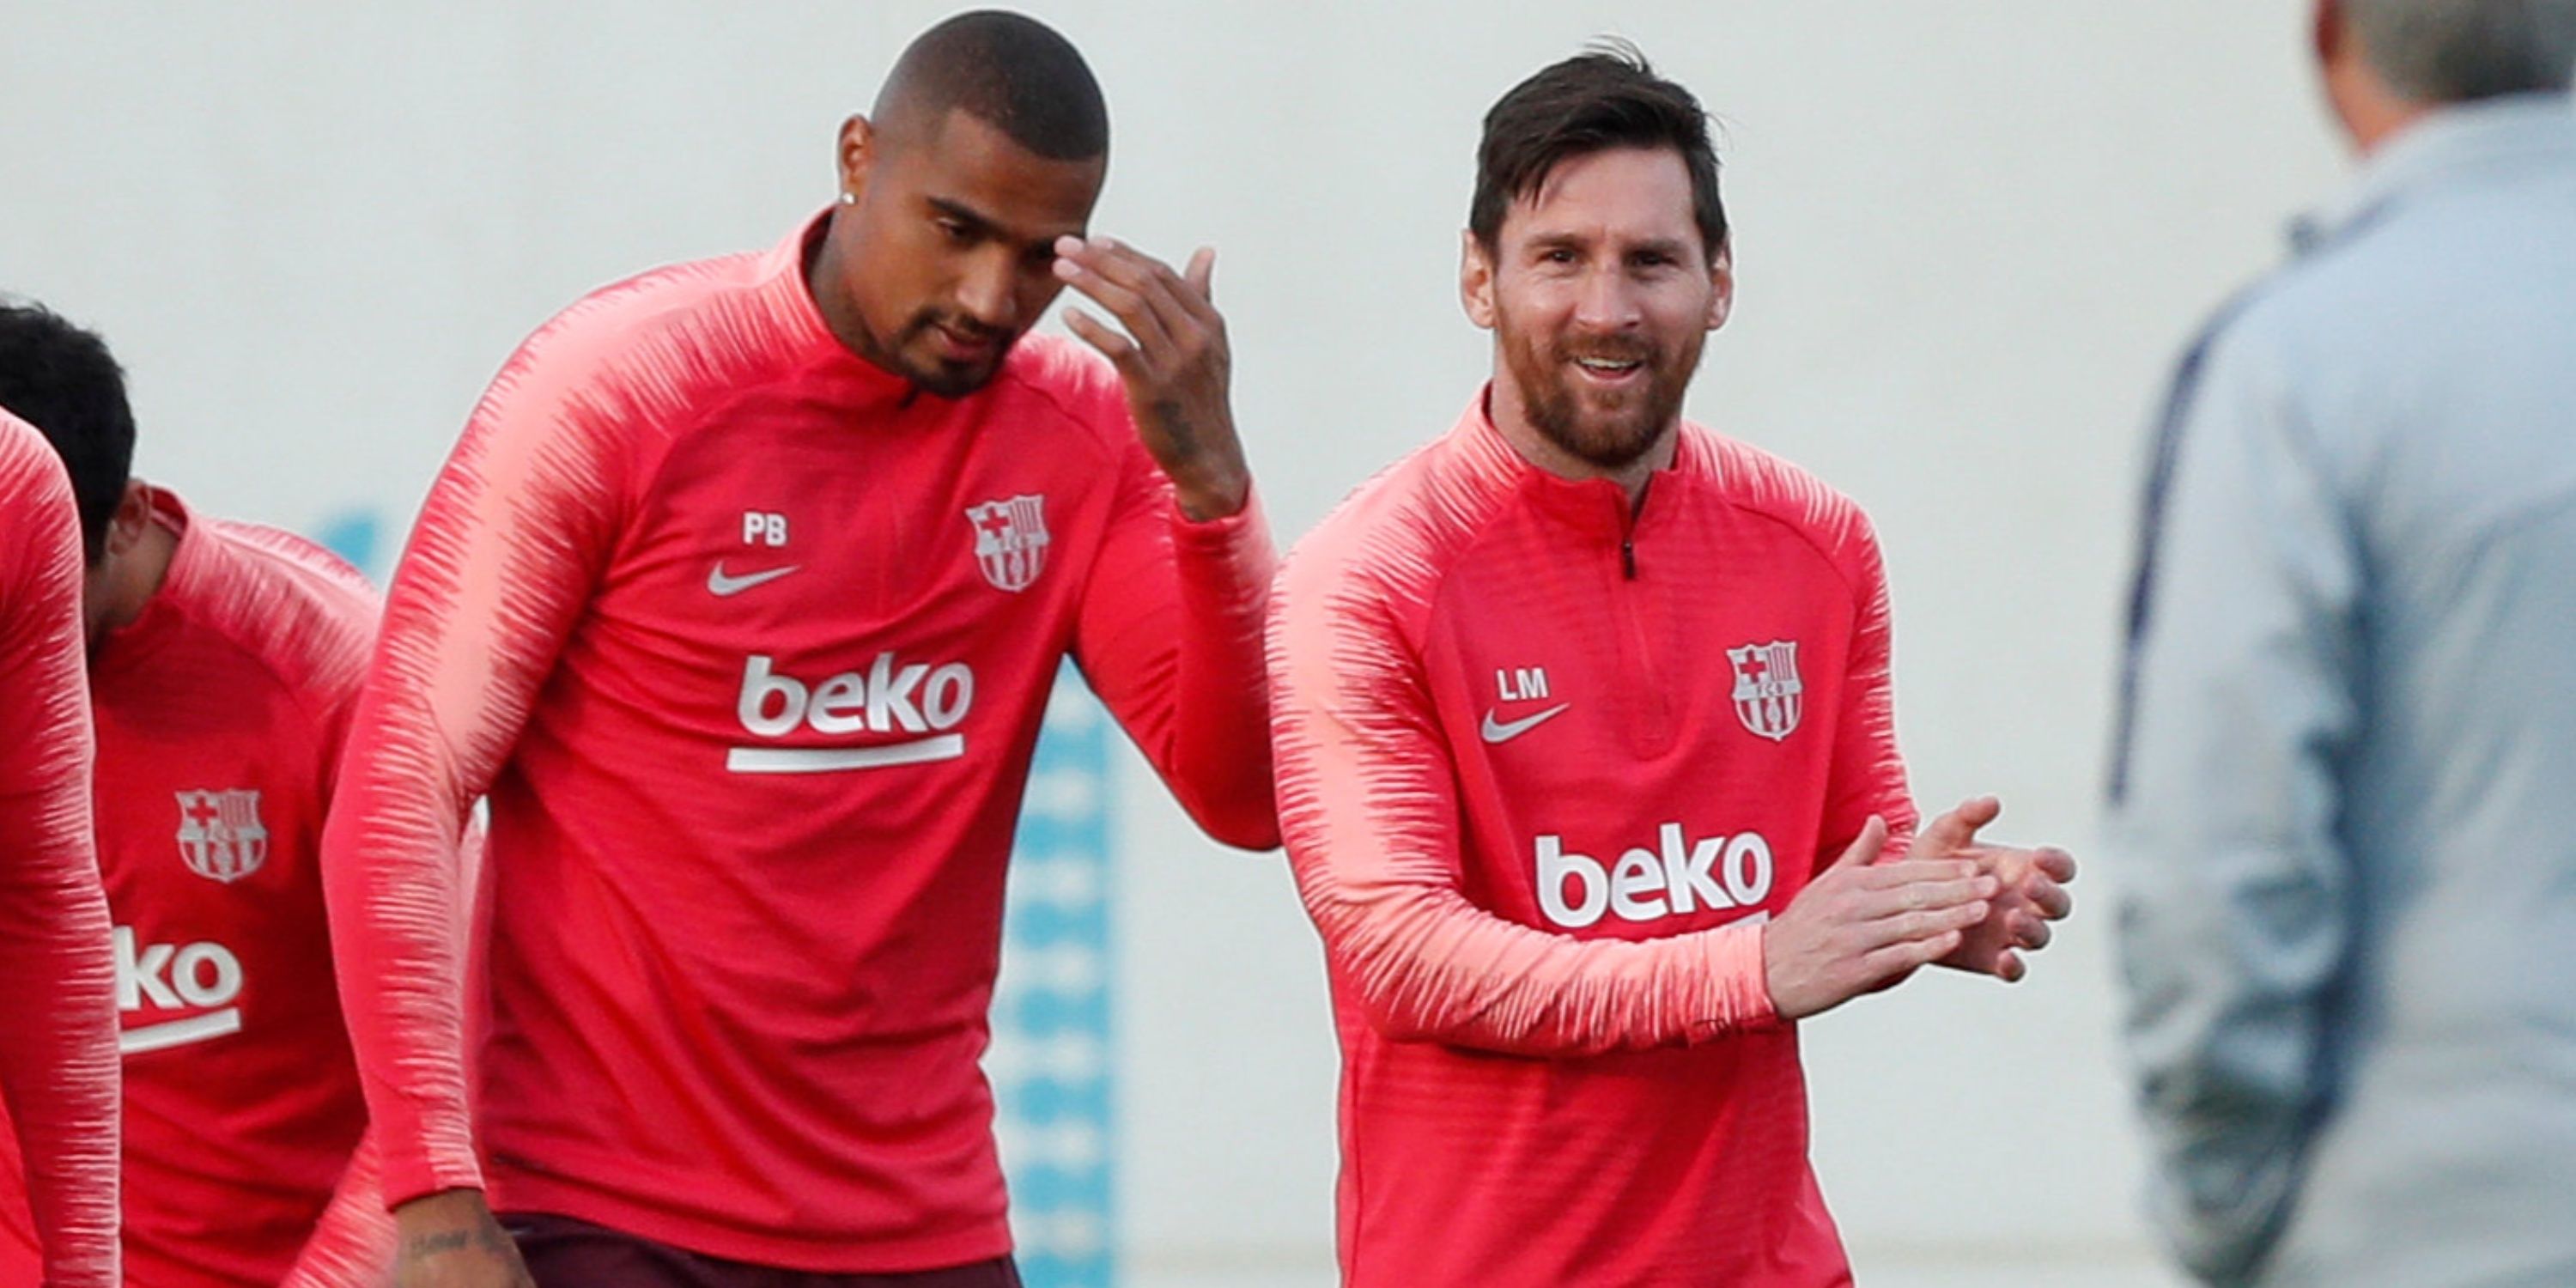 Lionel Messi asked Cristiano Ronaldo question after his Juventus move that  'showed the rivalry between them' as Kevin-Prince Boateng reveals shower  conversation with Barcelona legend